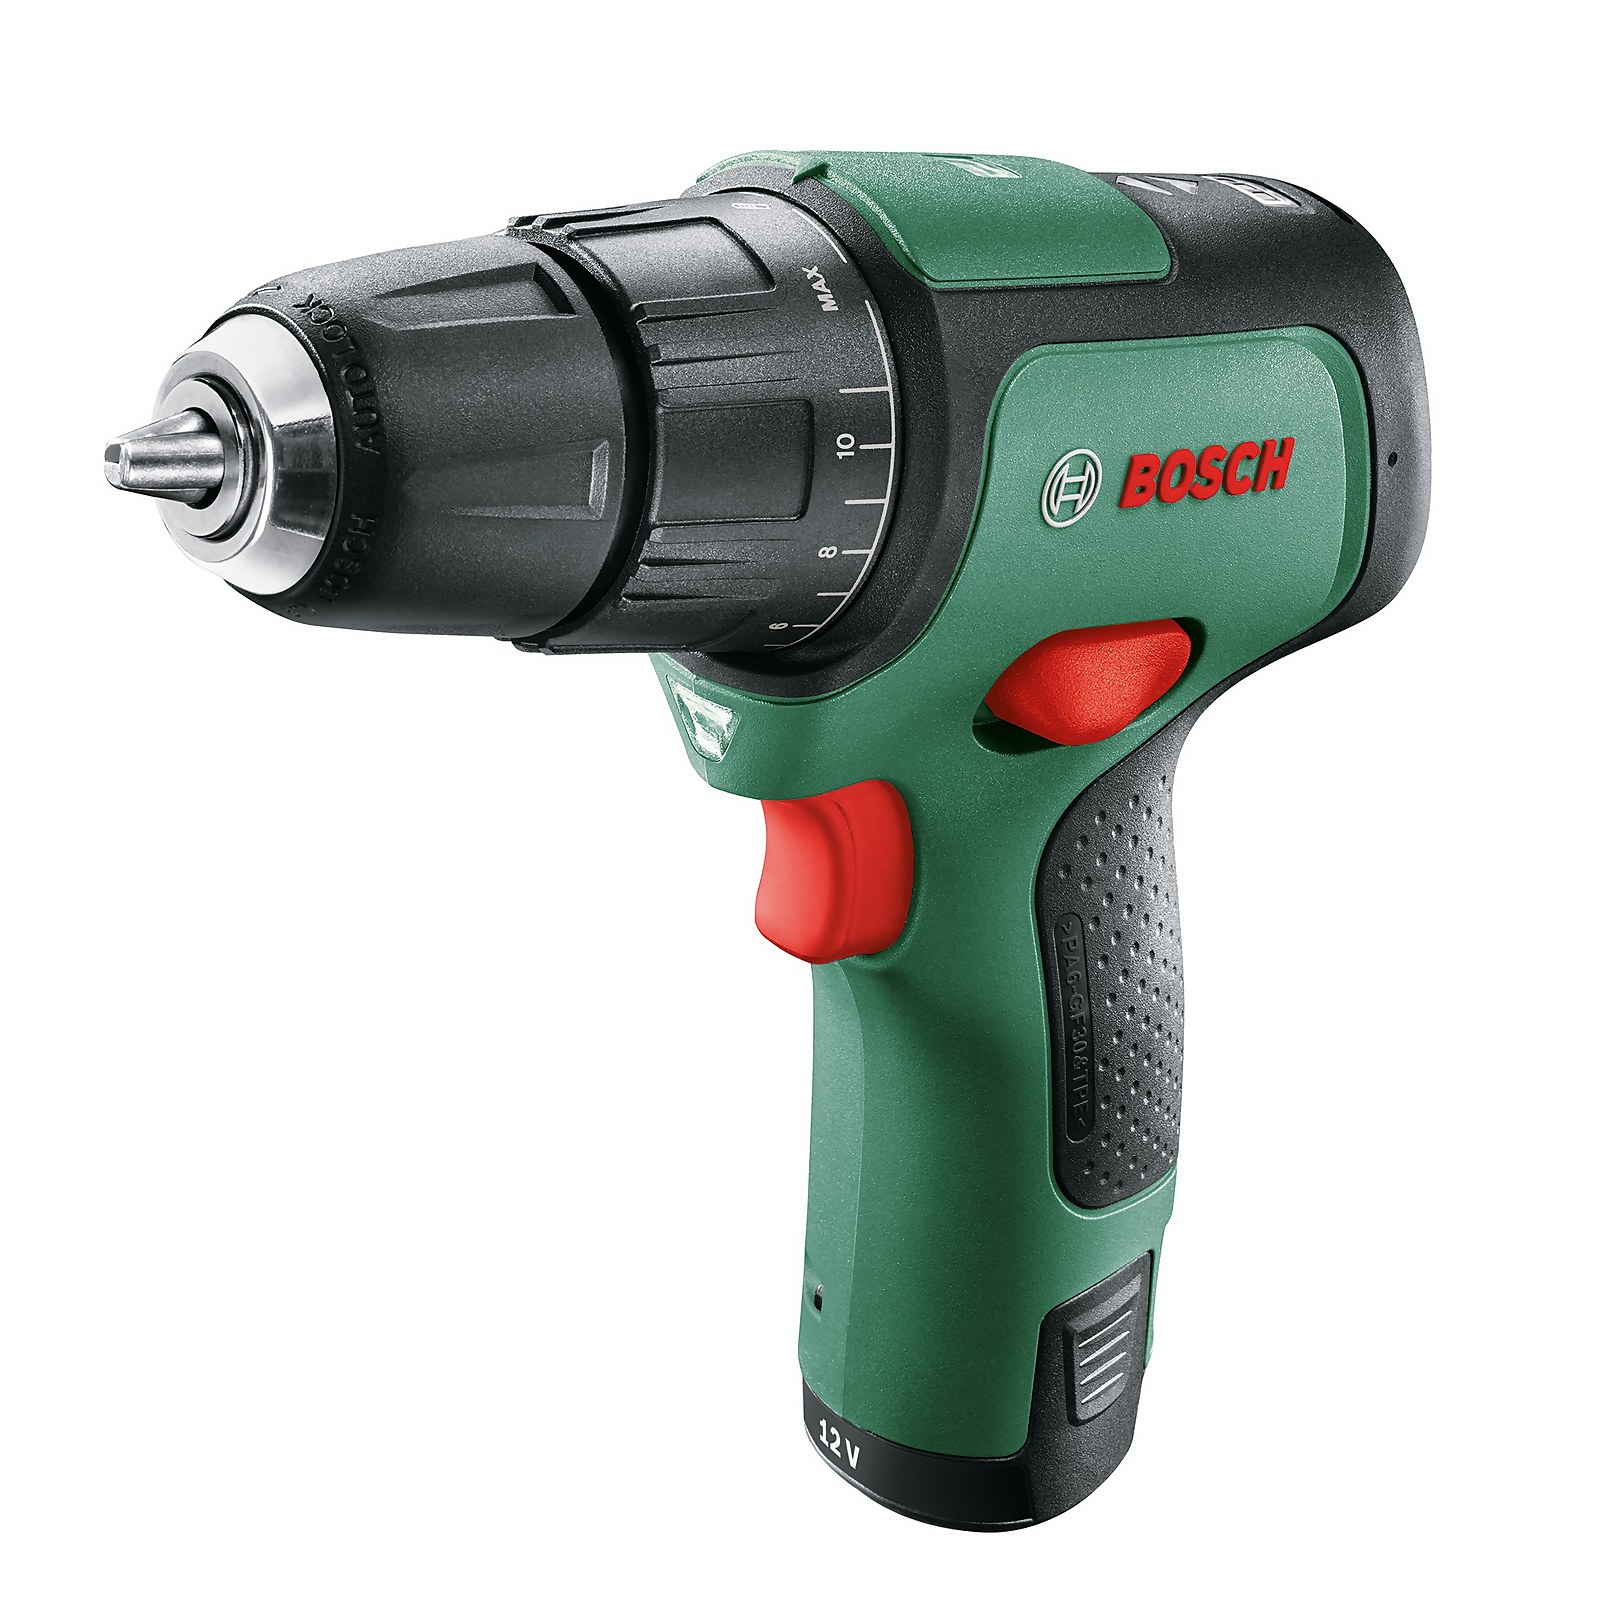 Photo of Bosch Easyimpact 12 Combi Drill With 1x 1.5 Ah Battery & Charger